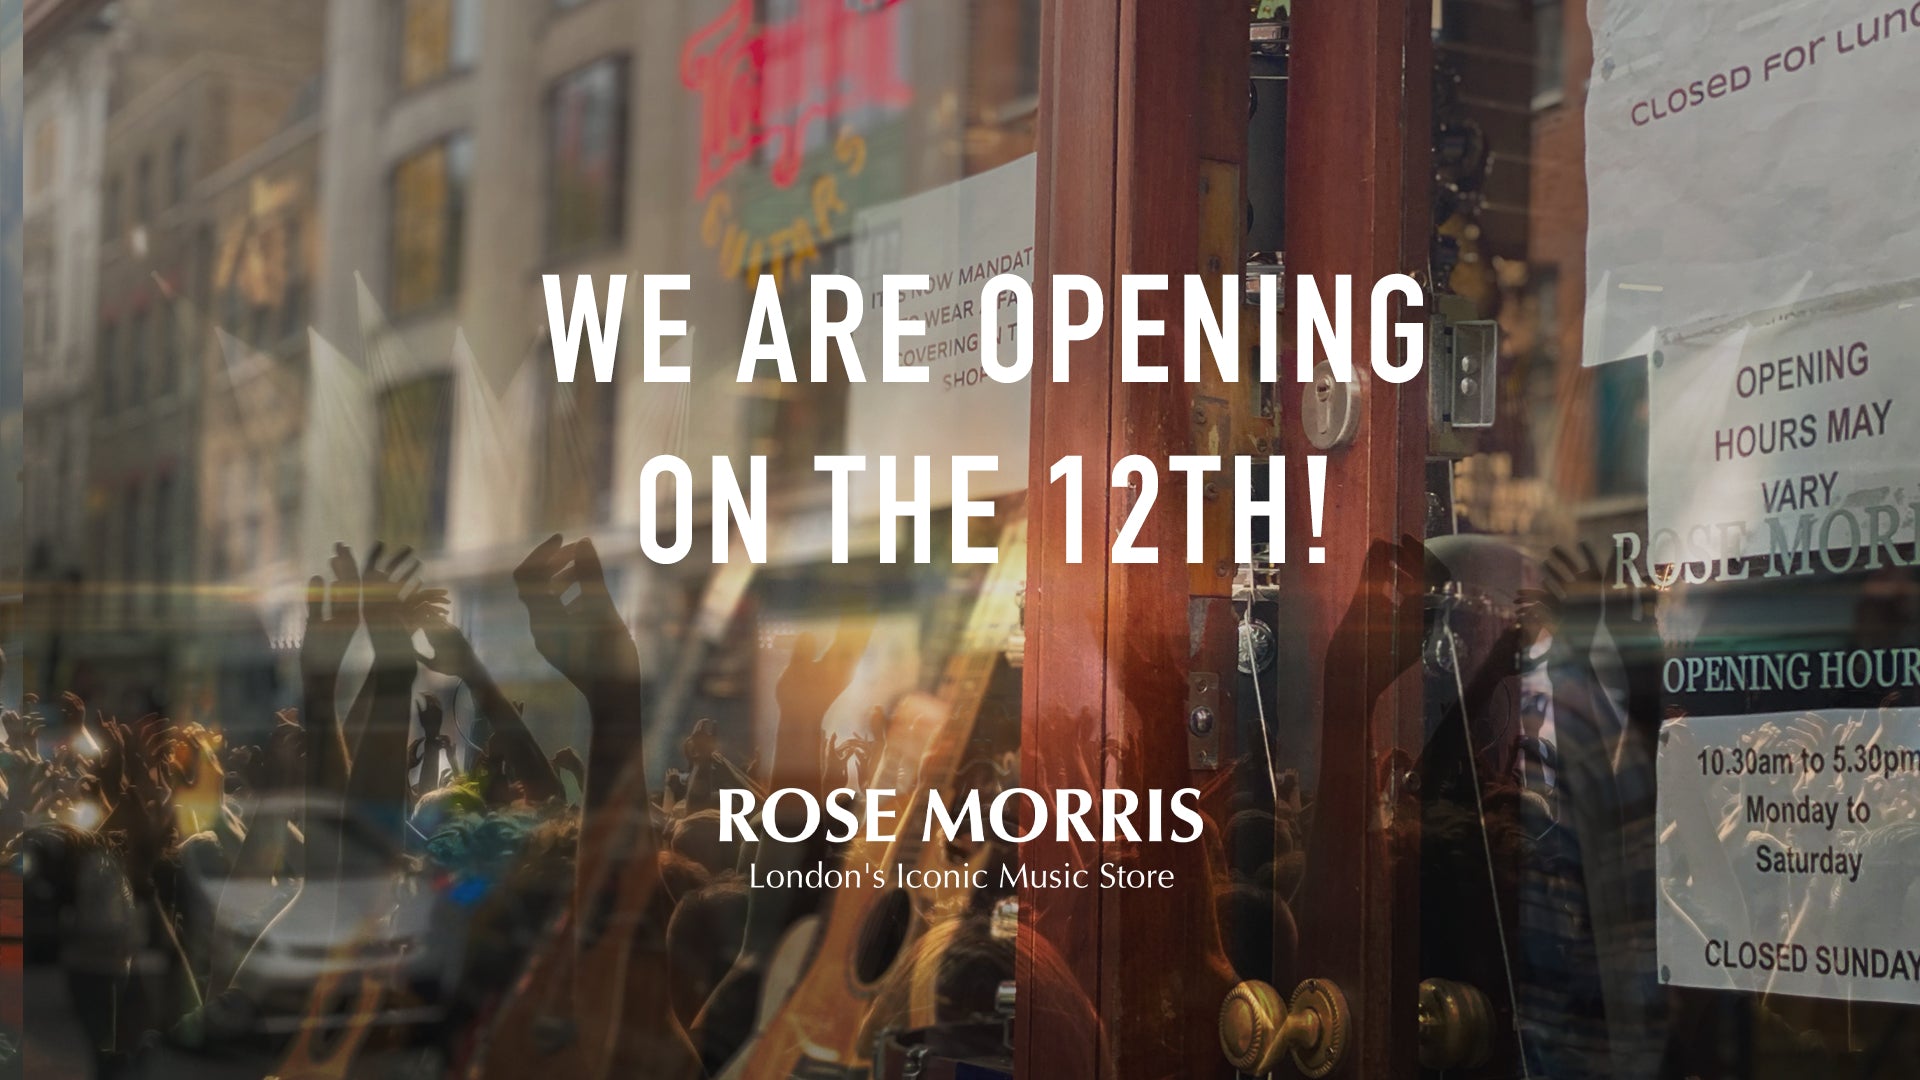 We are opening on the 12th...